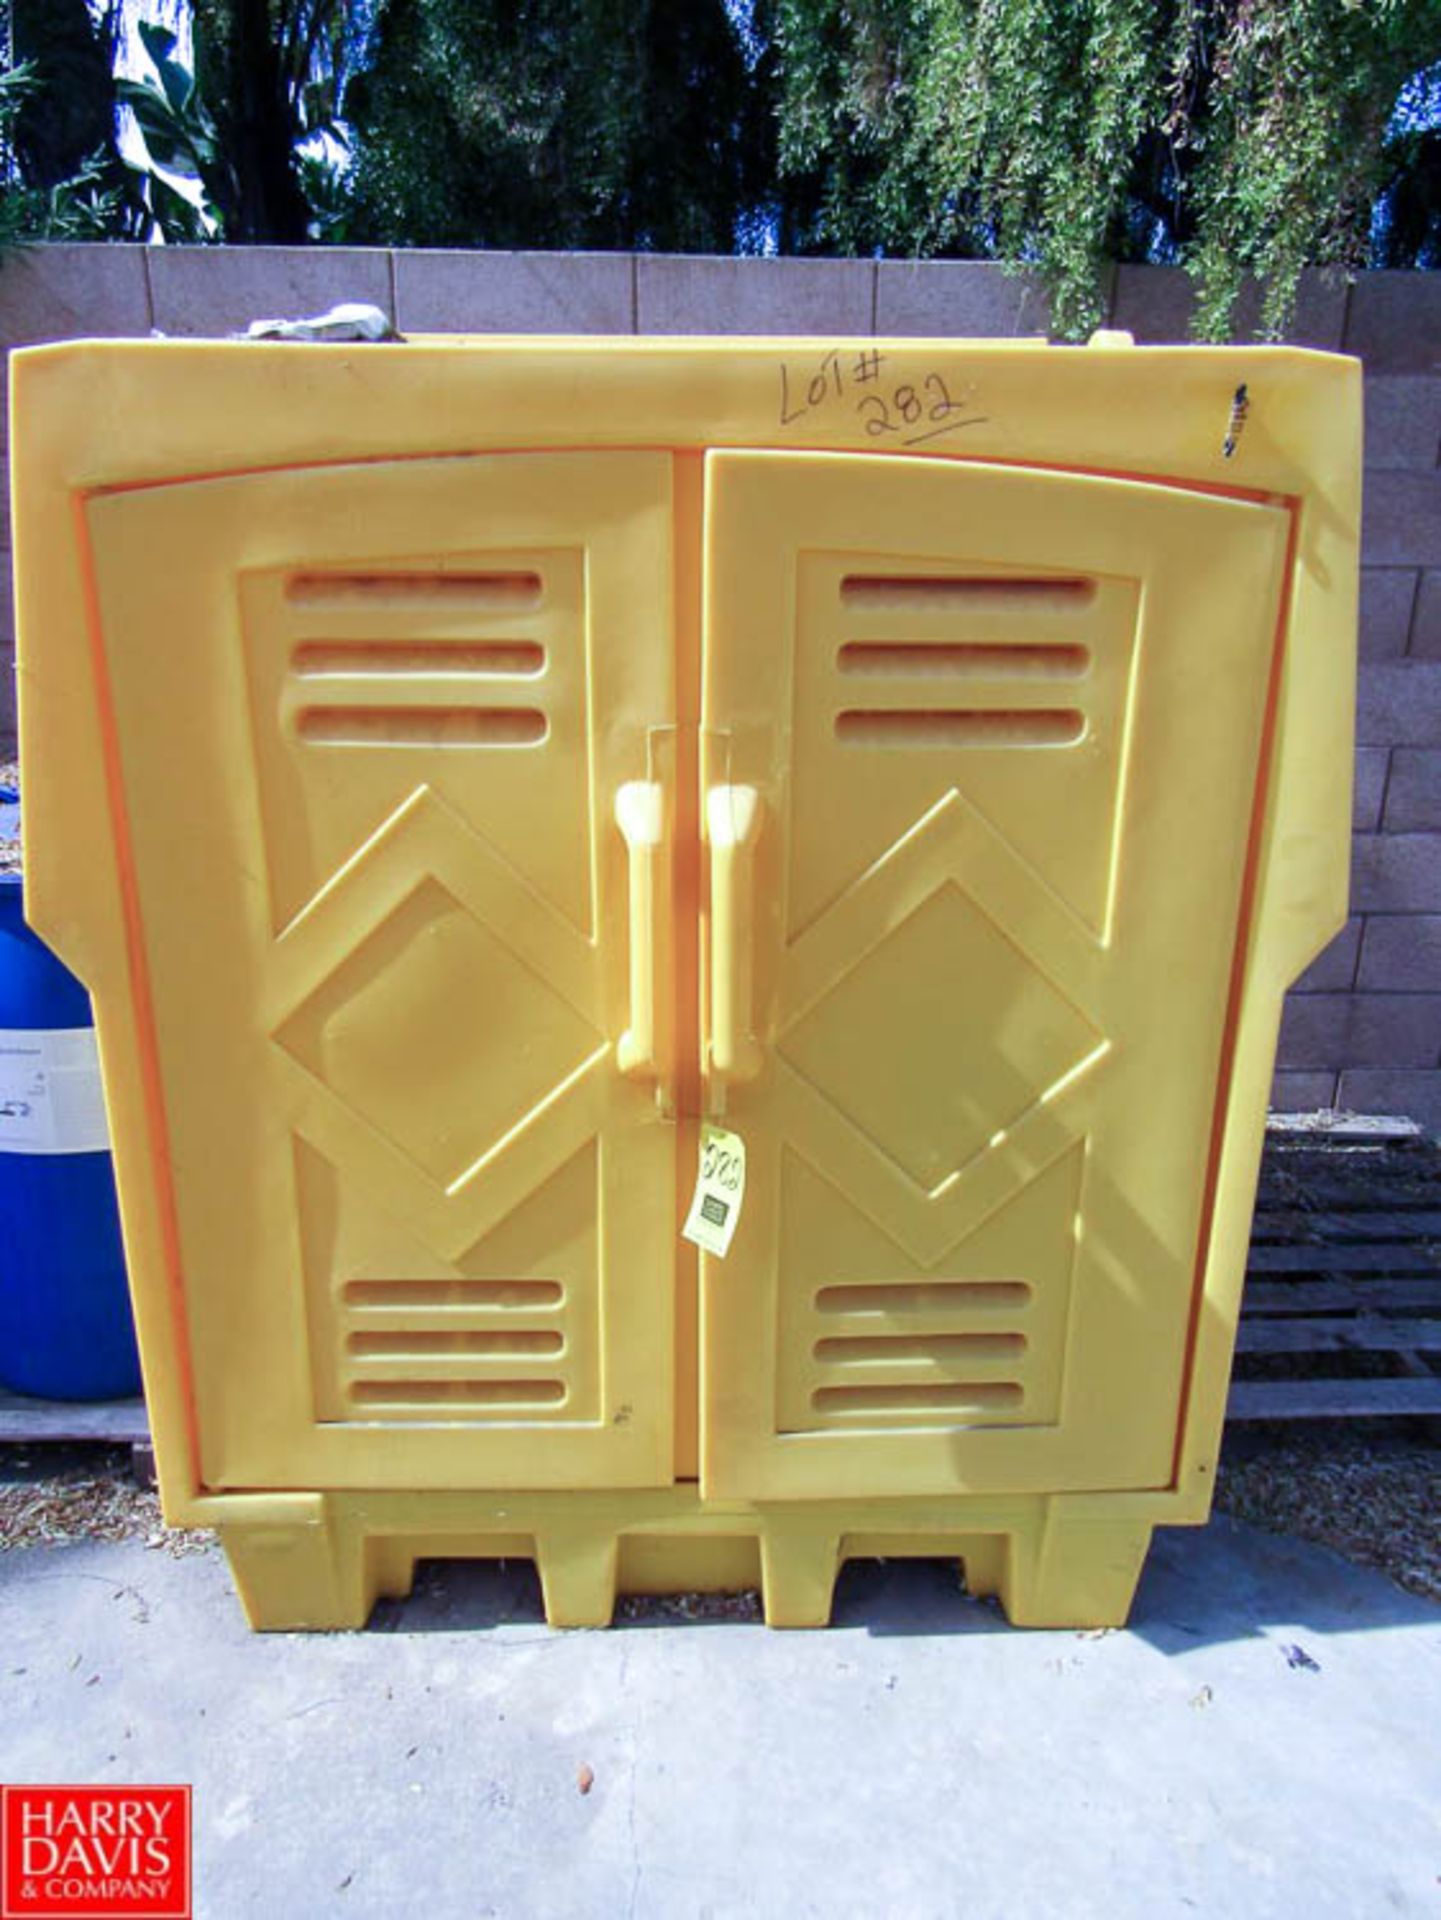 Eagle Outdoor Chemical Storage Building Model 1649 (4) 55-Gallon Drum Capacity Rigging Fee: $ 25